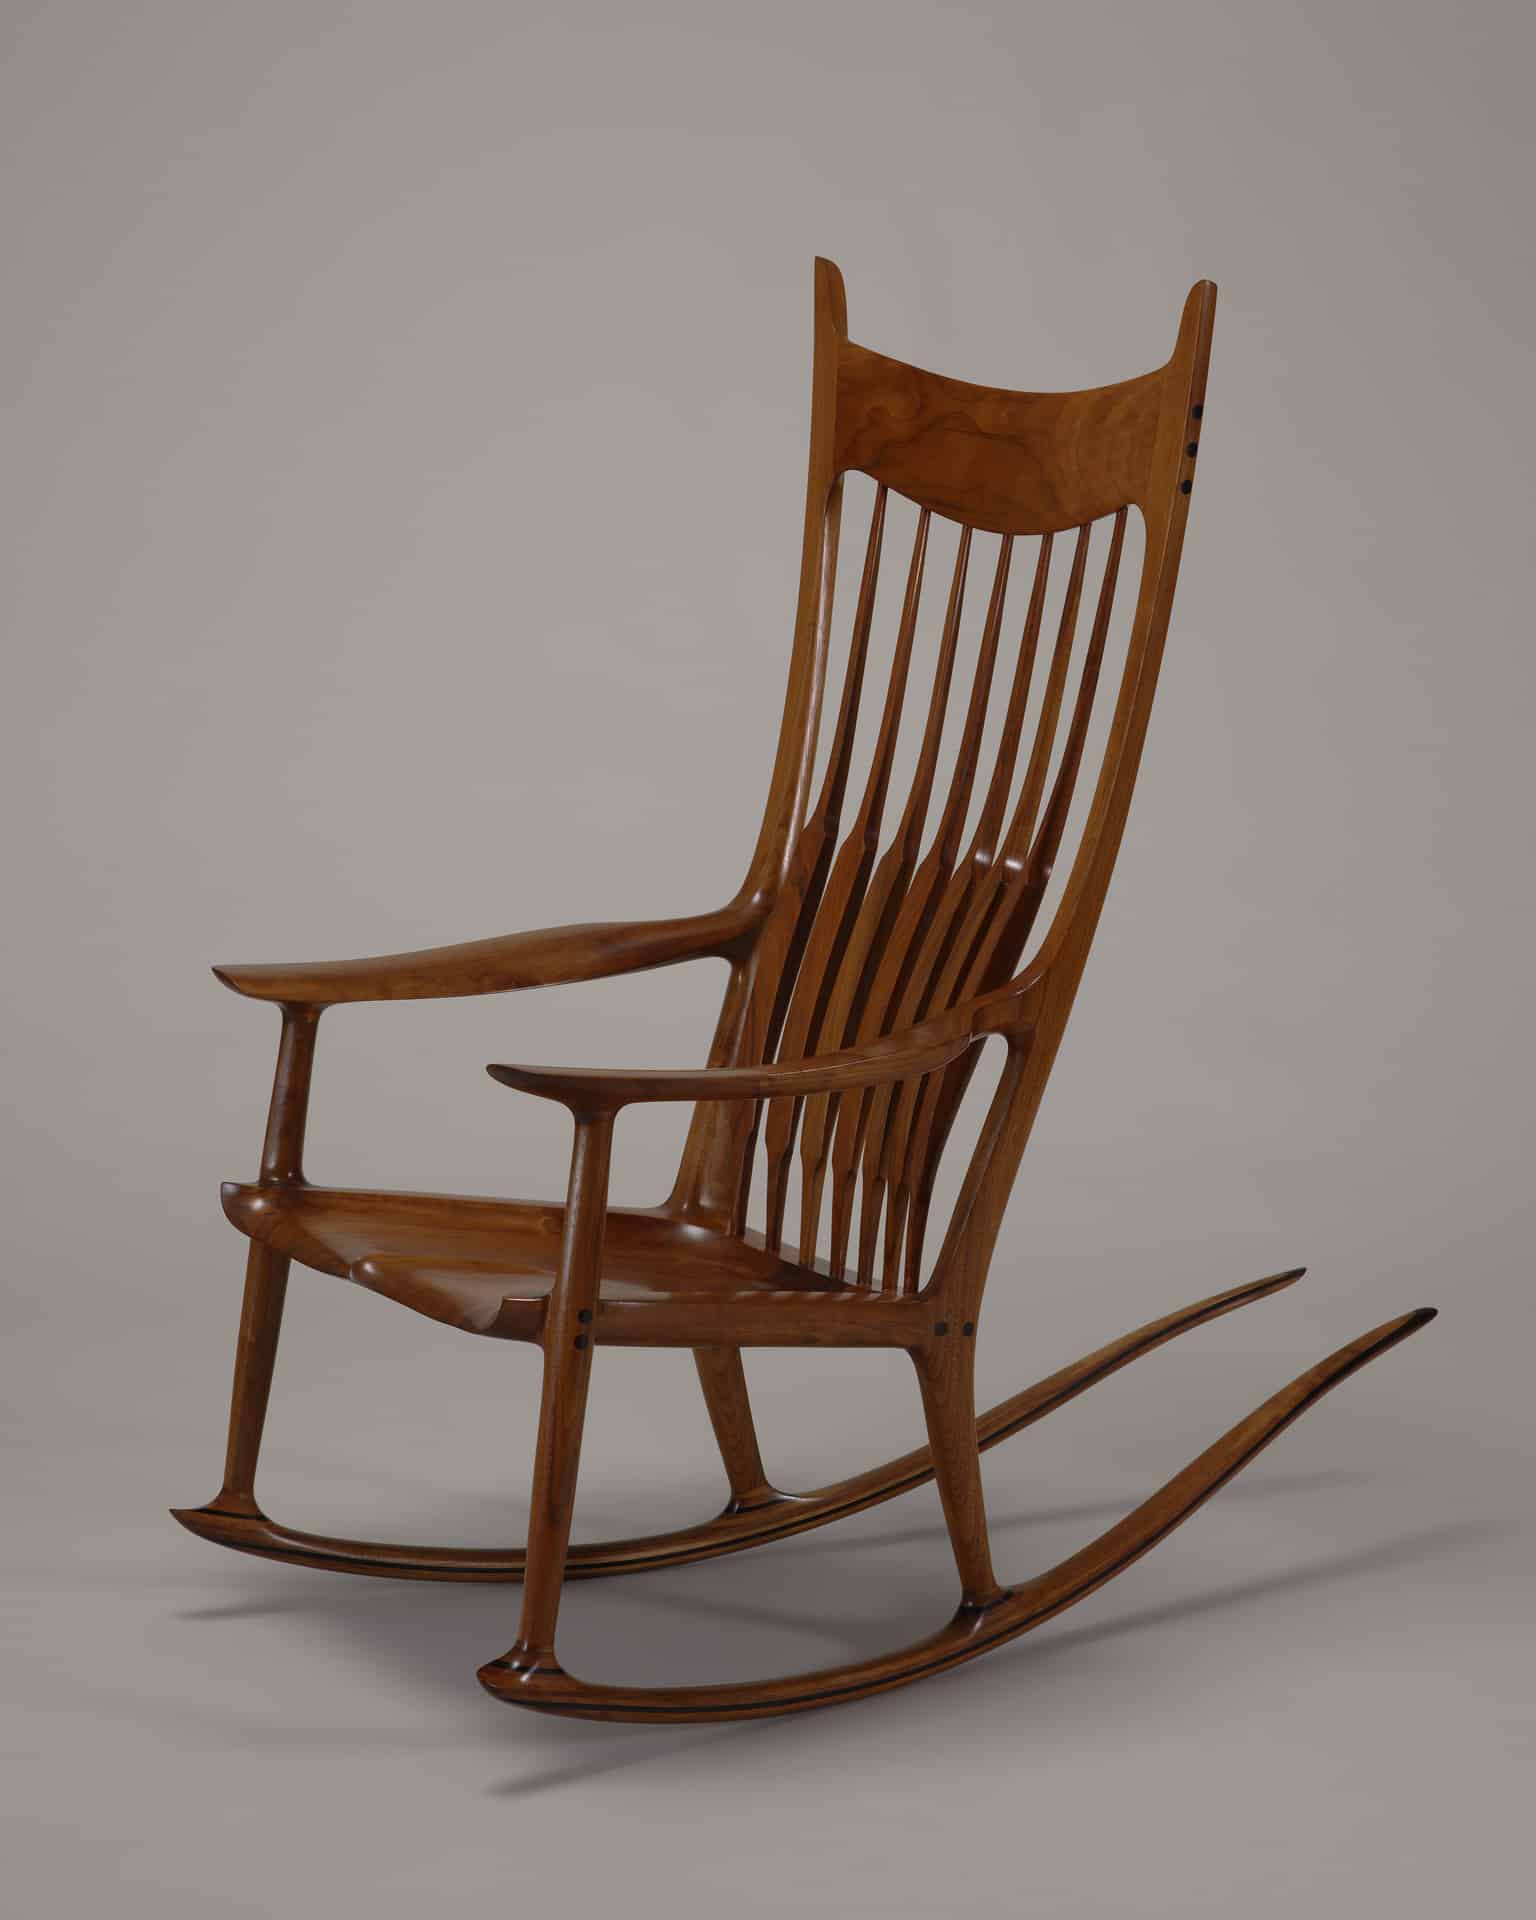 a photograph of a brown wooden rocking chair